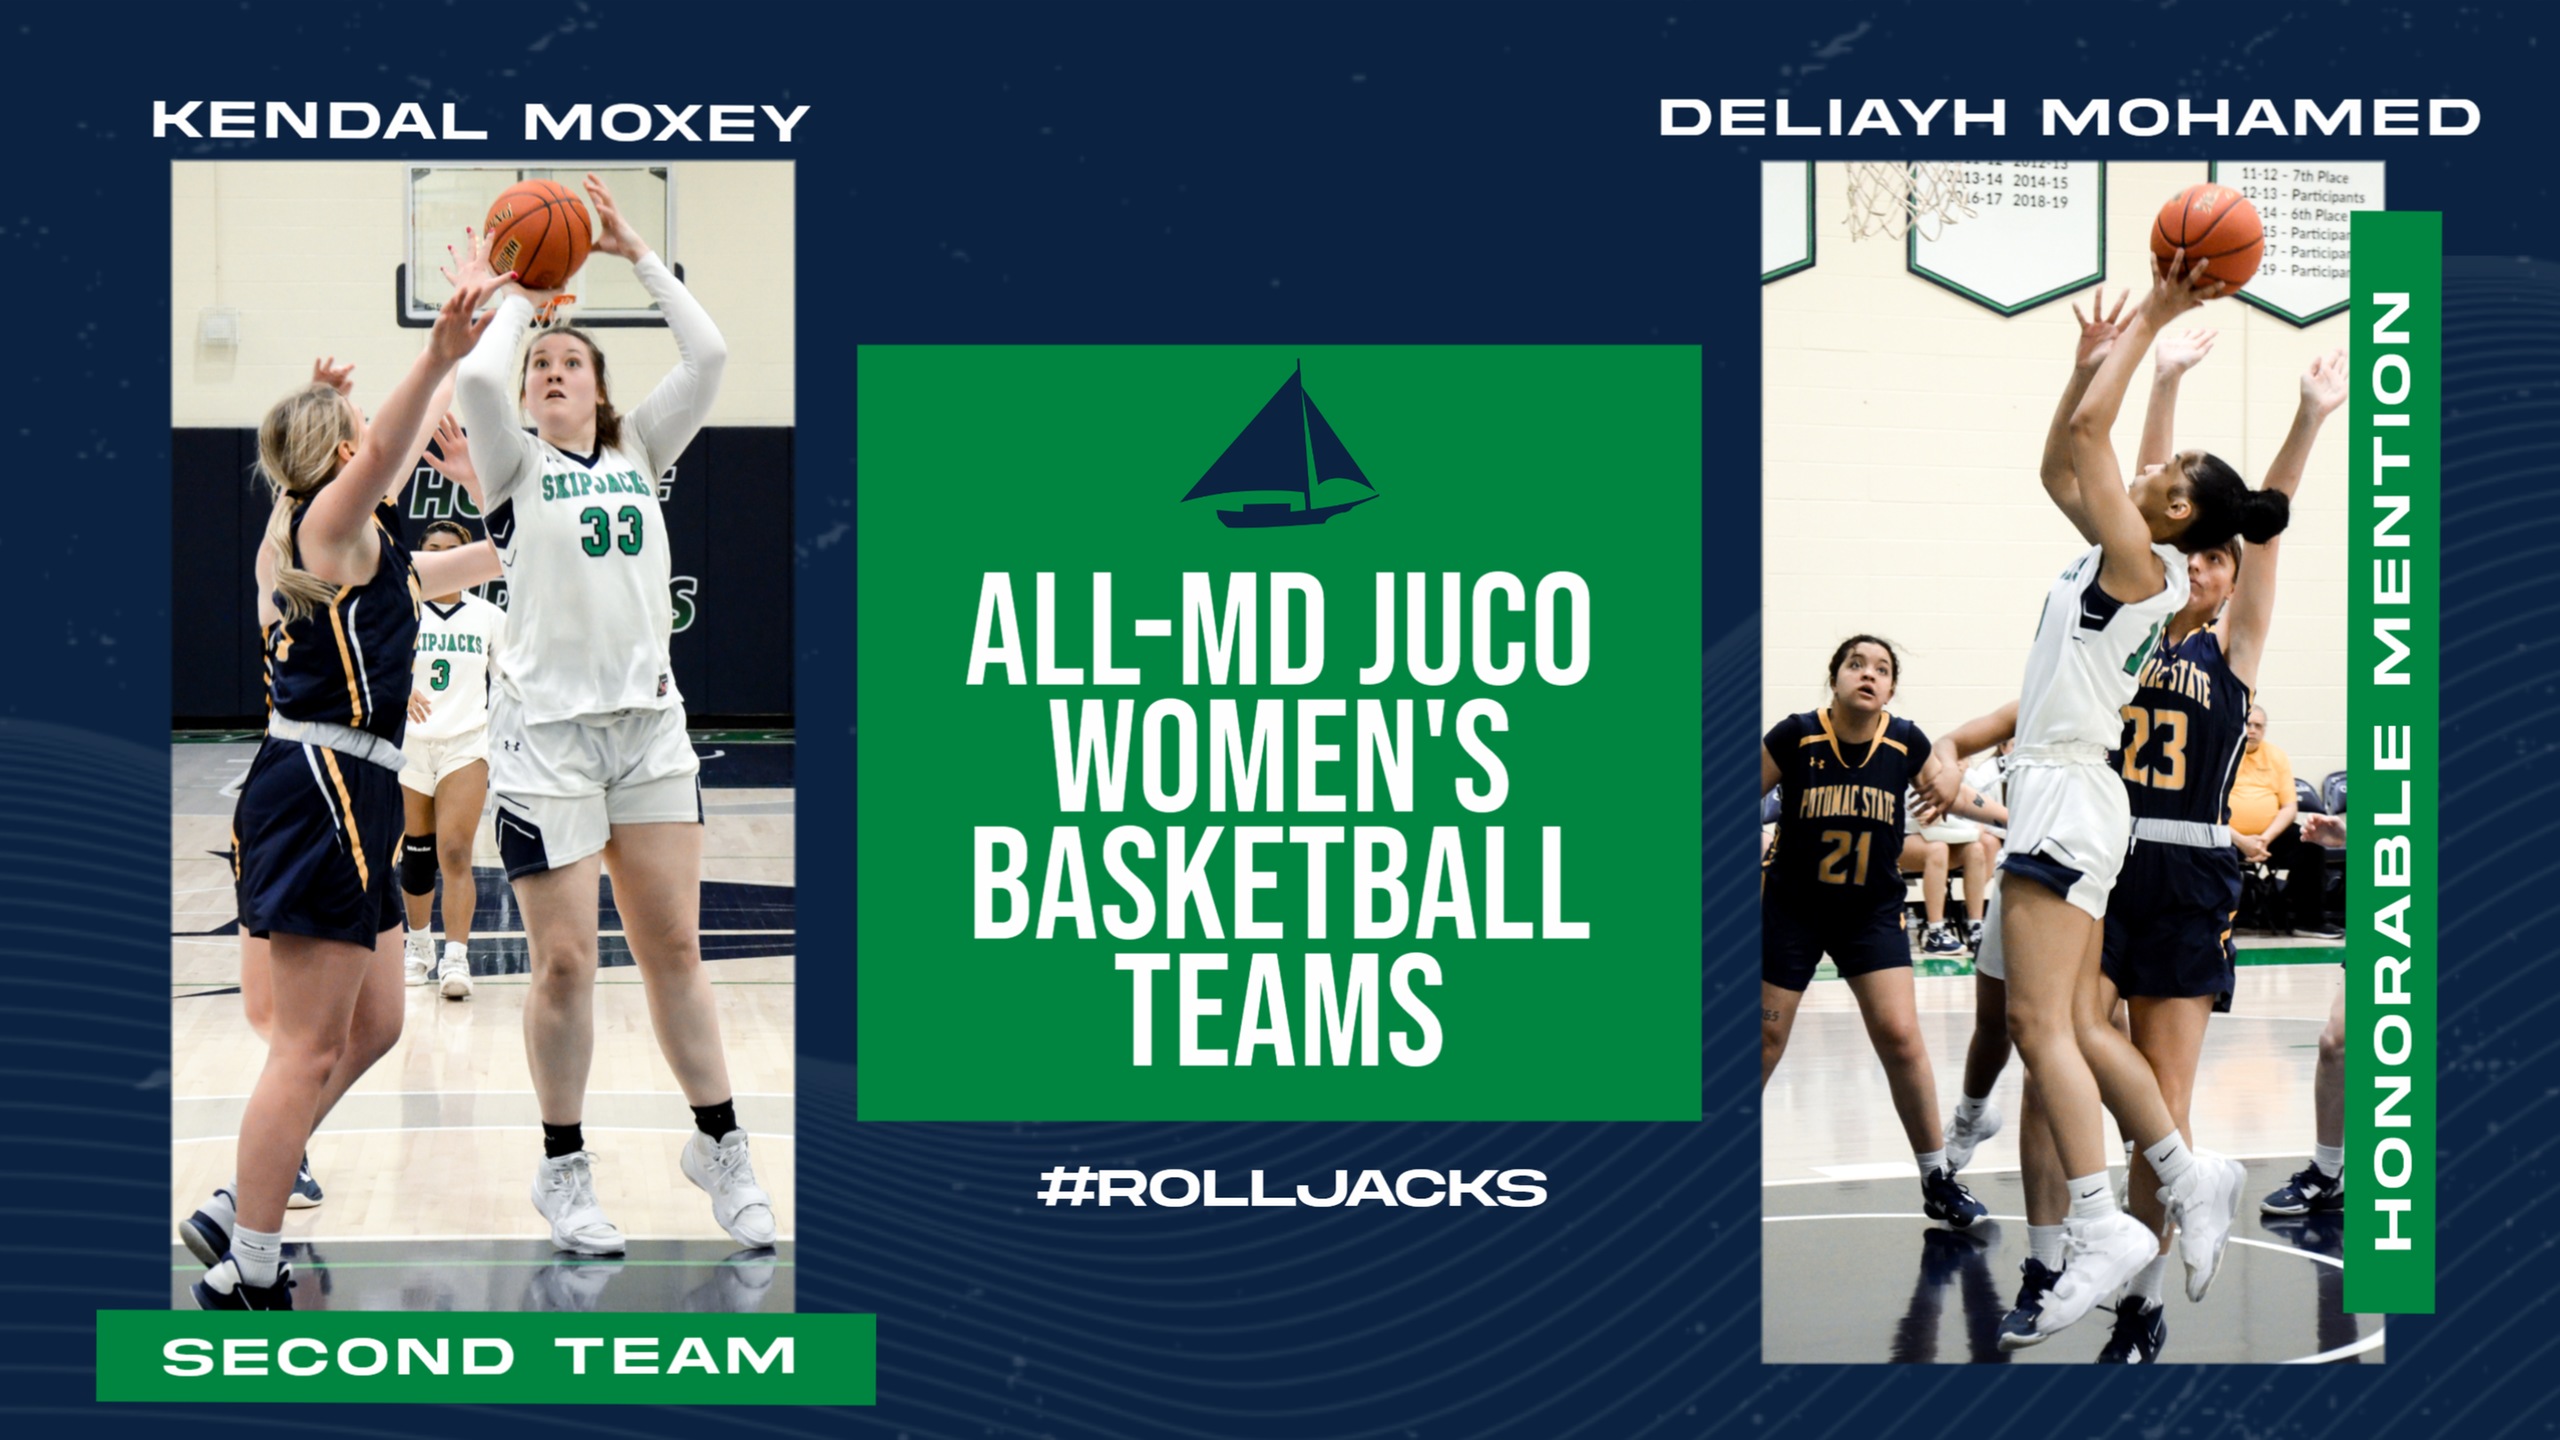 All-MD JUCO Teams Women's Basketball